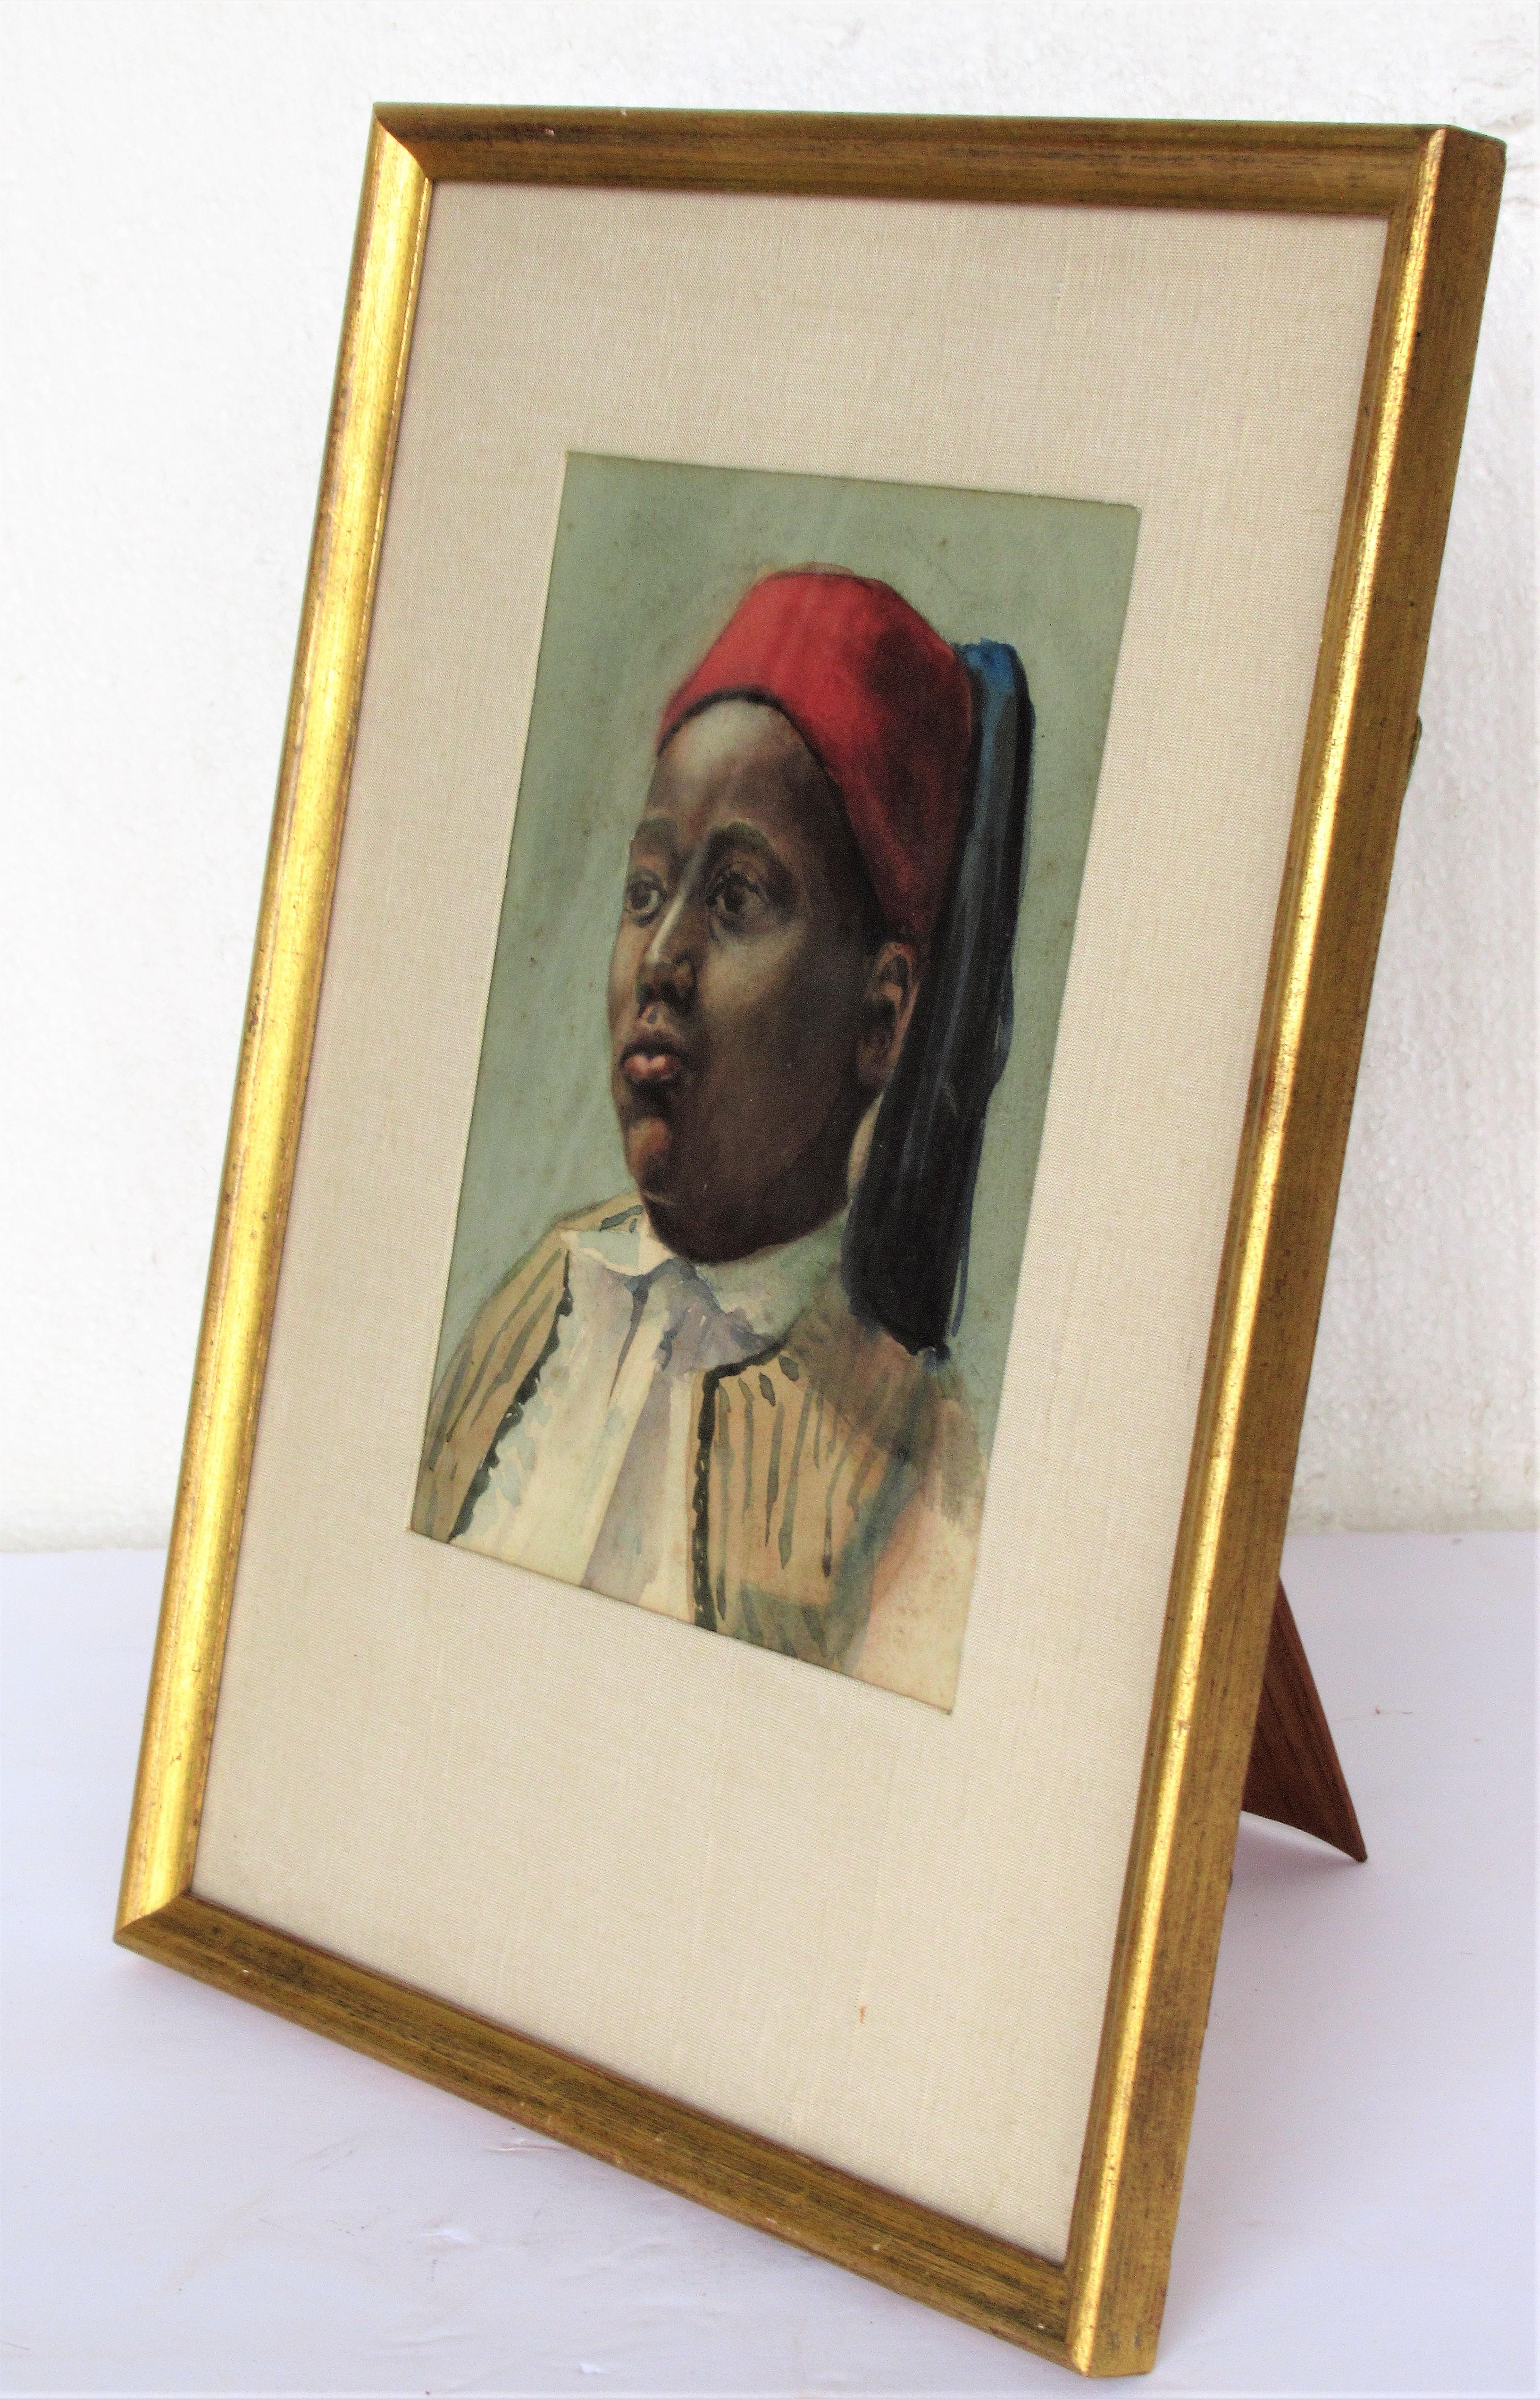 19th century orientalist watercolor painting on artist board, portrait of young boy wearing a fez. Set in a nice vintage giltwood and glass tabletop frame with linen mat. Nice little painting. Look at all pictures and read condition report in